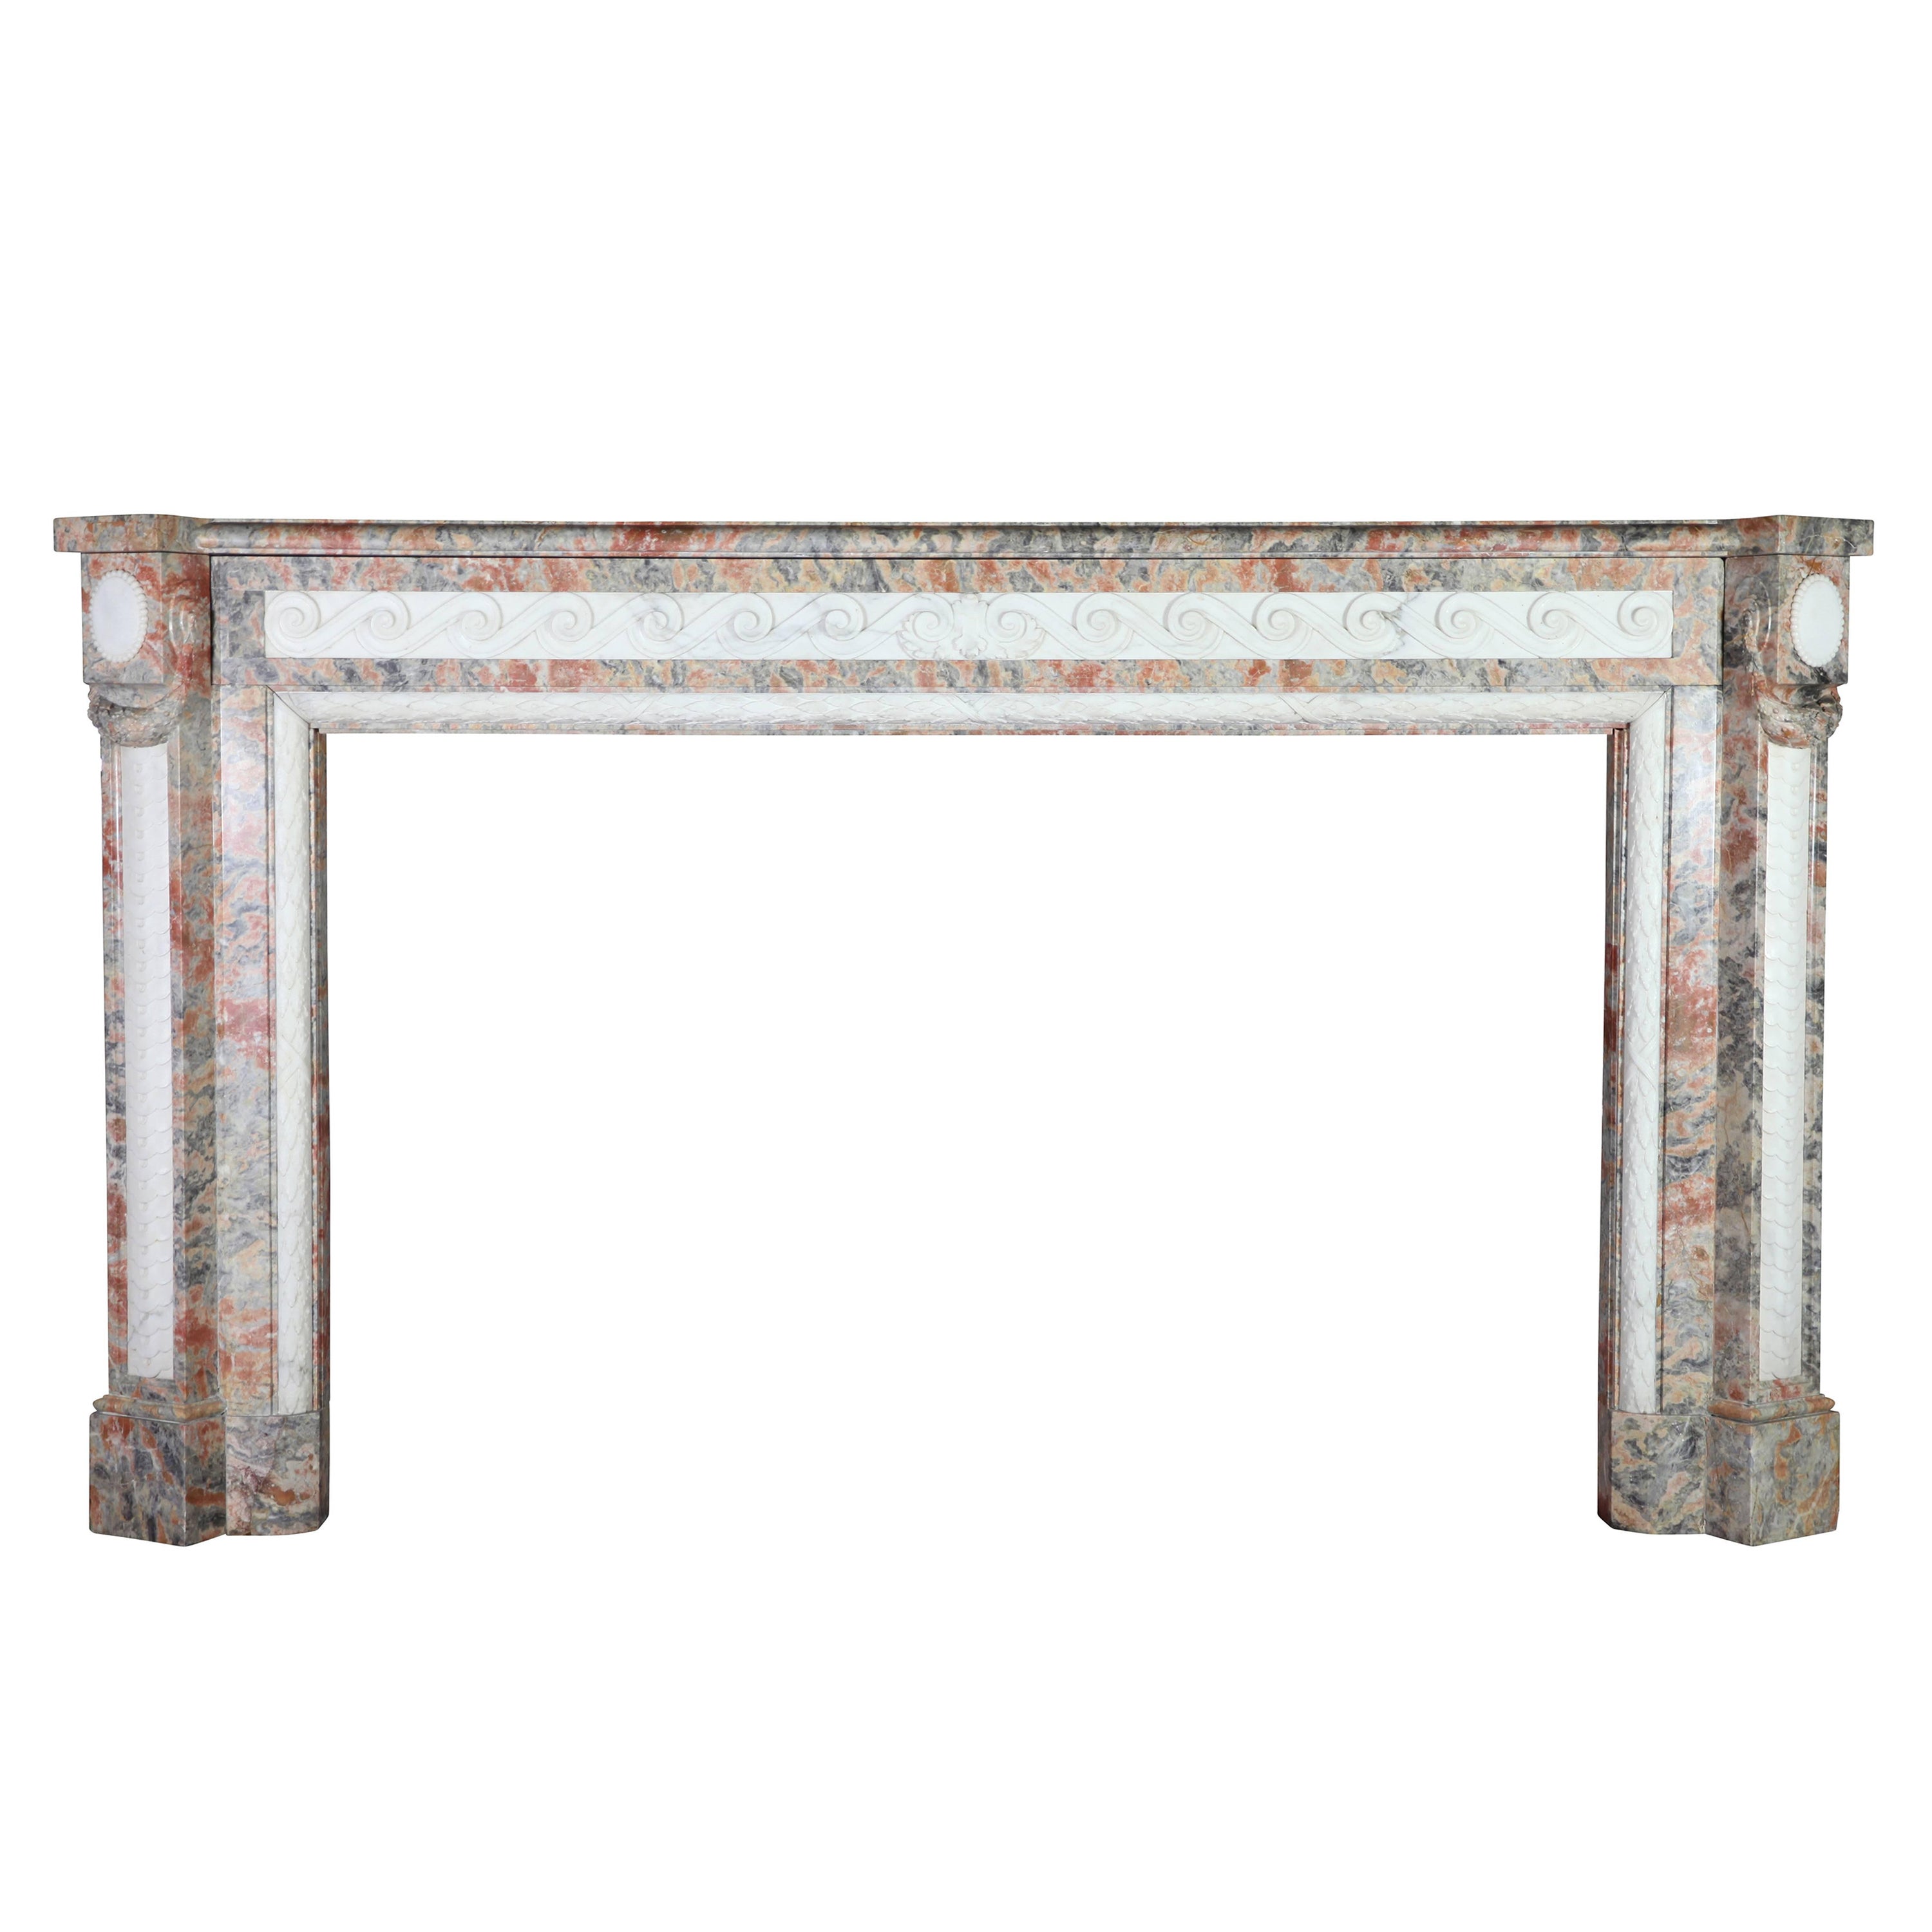 Grand Paladium Antique Fireplace Surround in Rouge Languedoc Marble For Sale